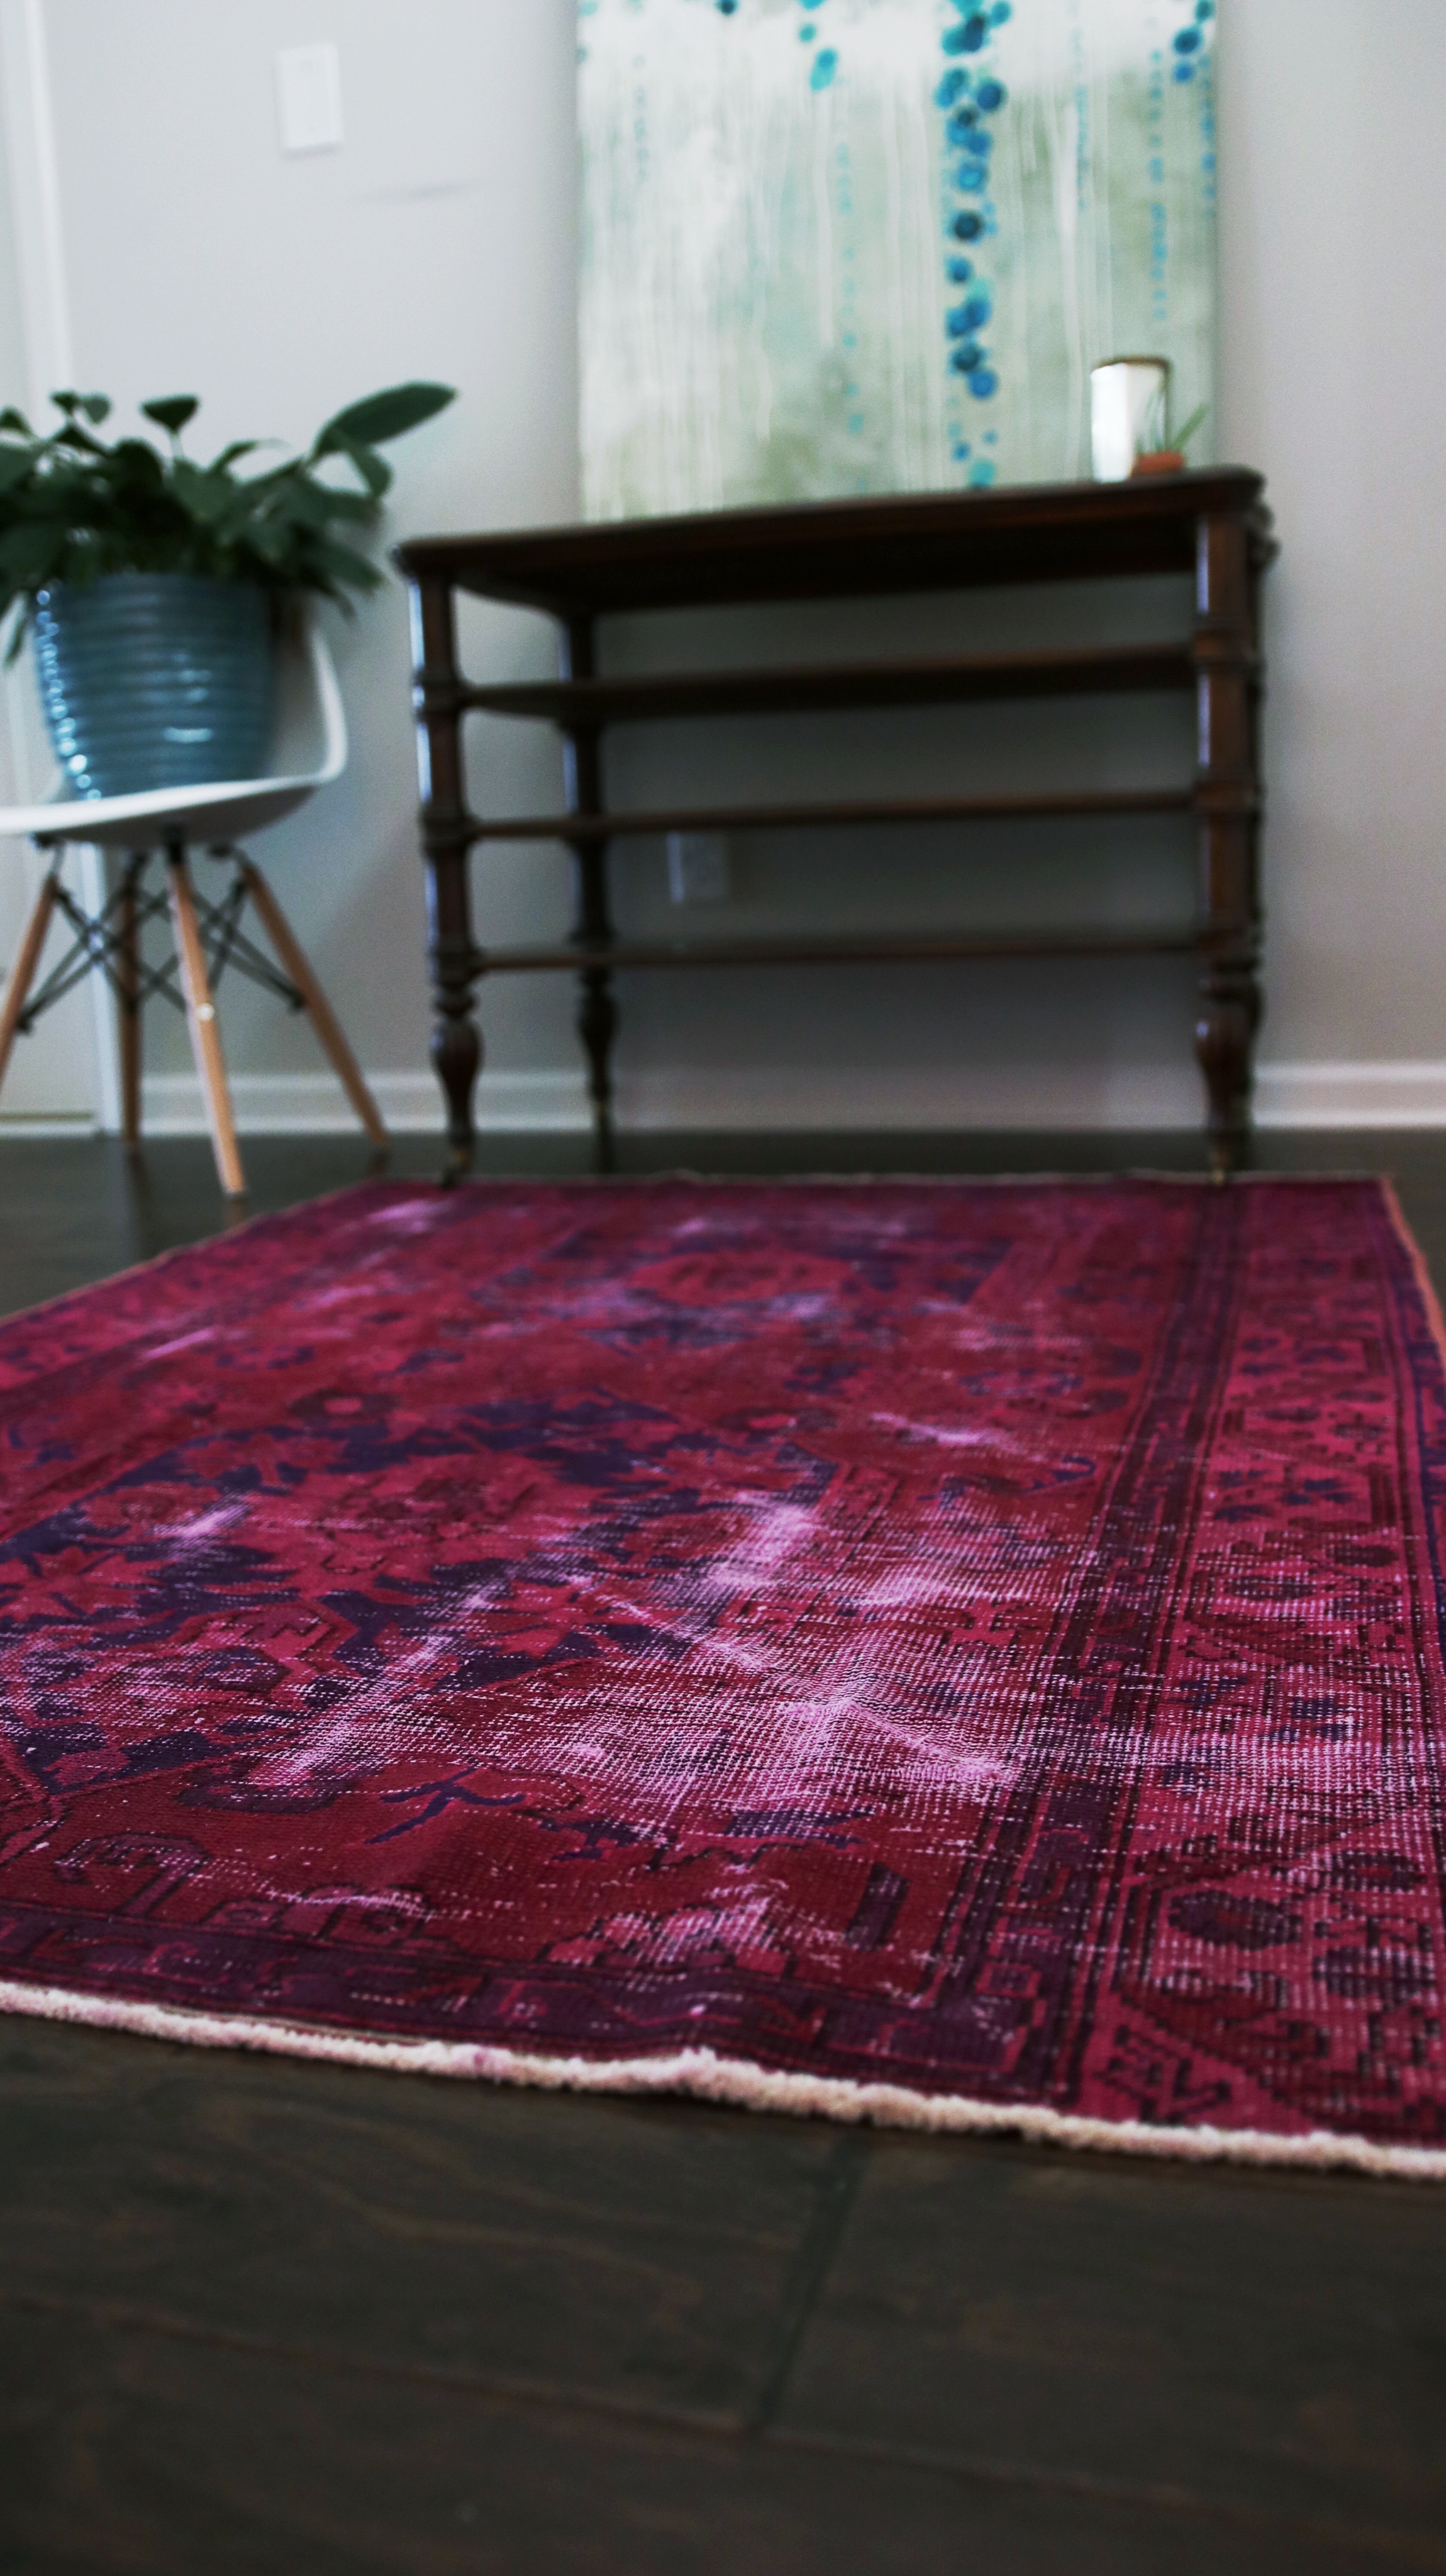 Entryway With Revival Rugs Cadie Fletcher